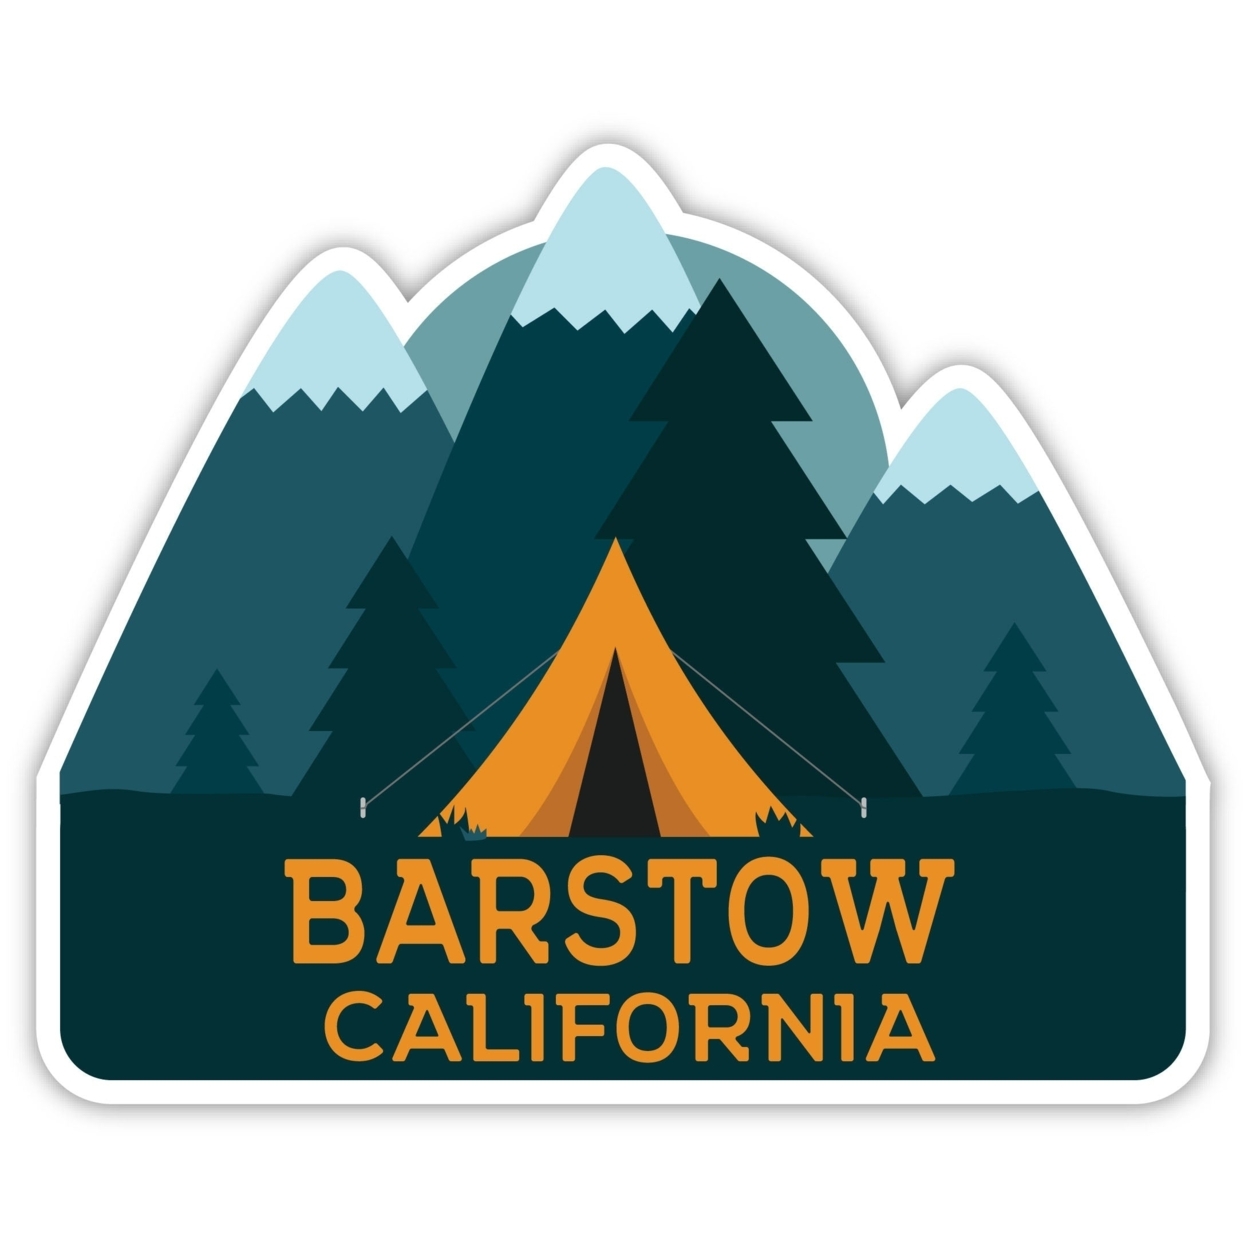 Barstow California Souvenir Decorative Stickers (Choose Theme And Size) - 4-Pack, 6-Inch, Adventures Awaits